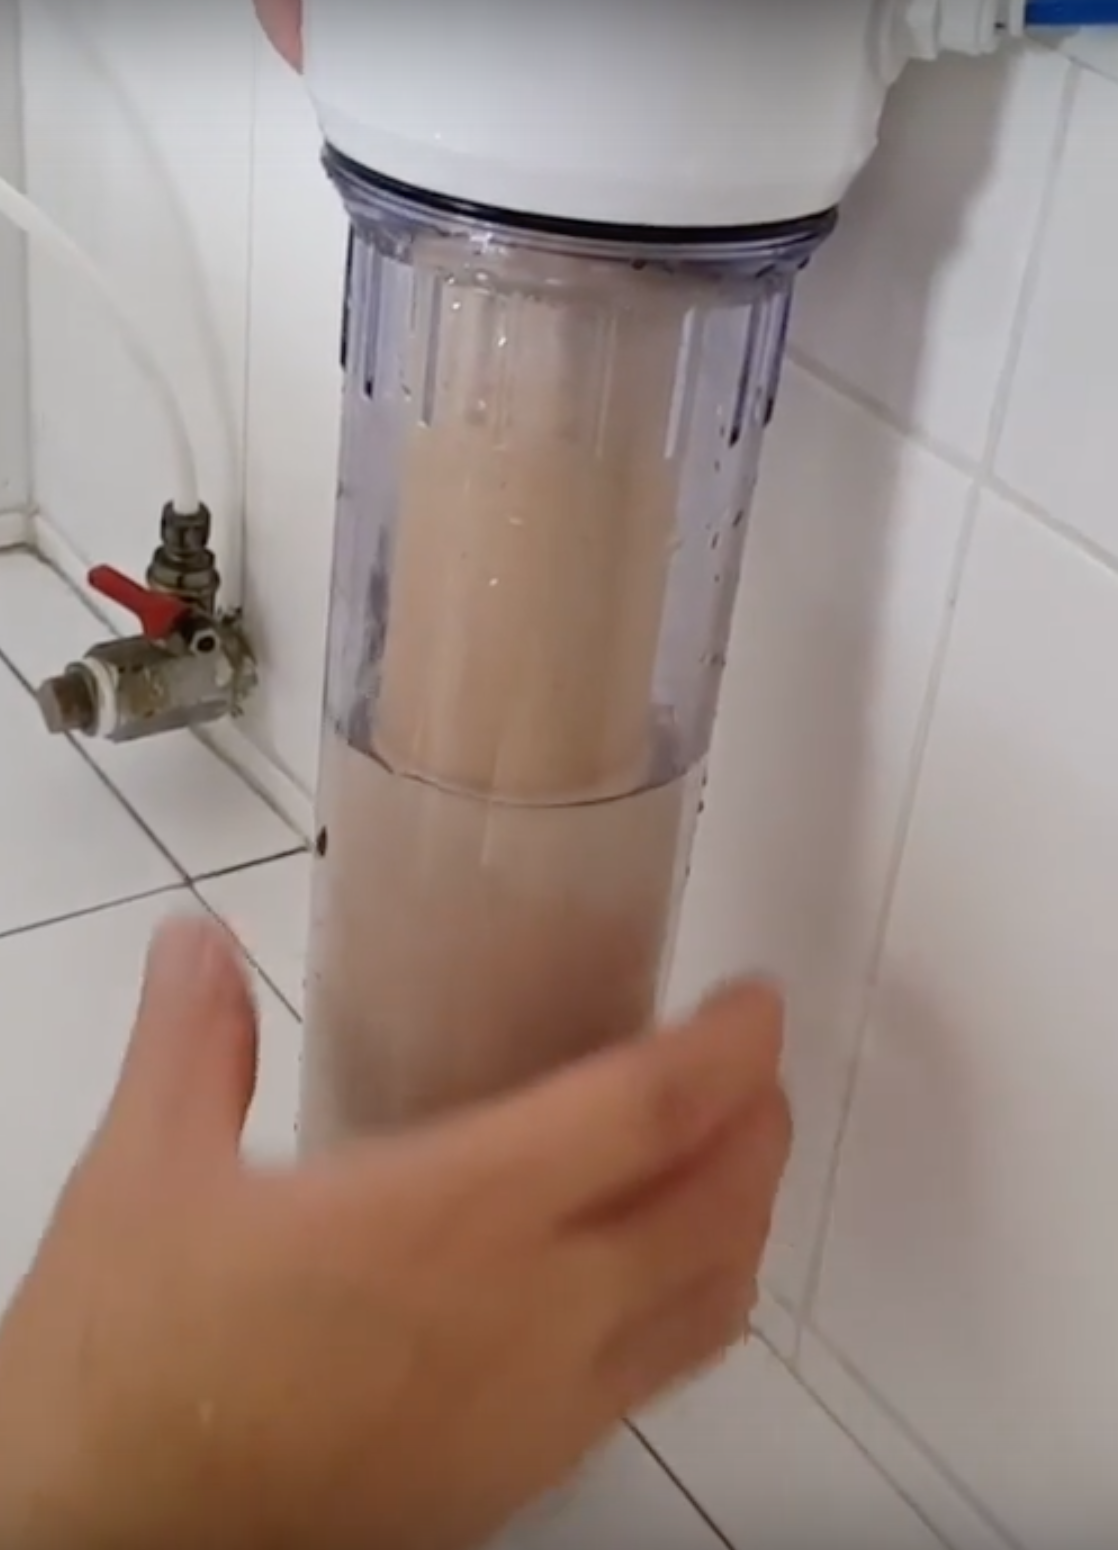 # How to fix water coverage issue for ceramic filter housing?